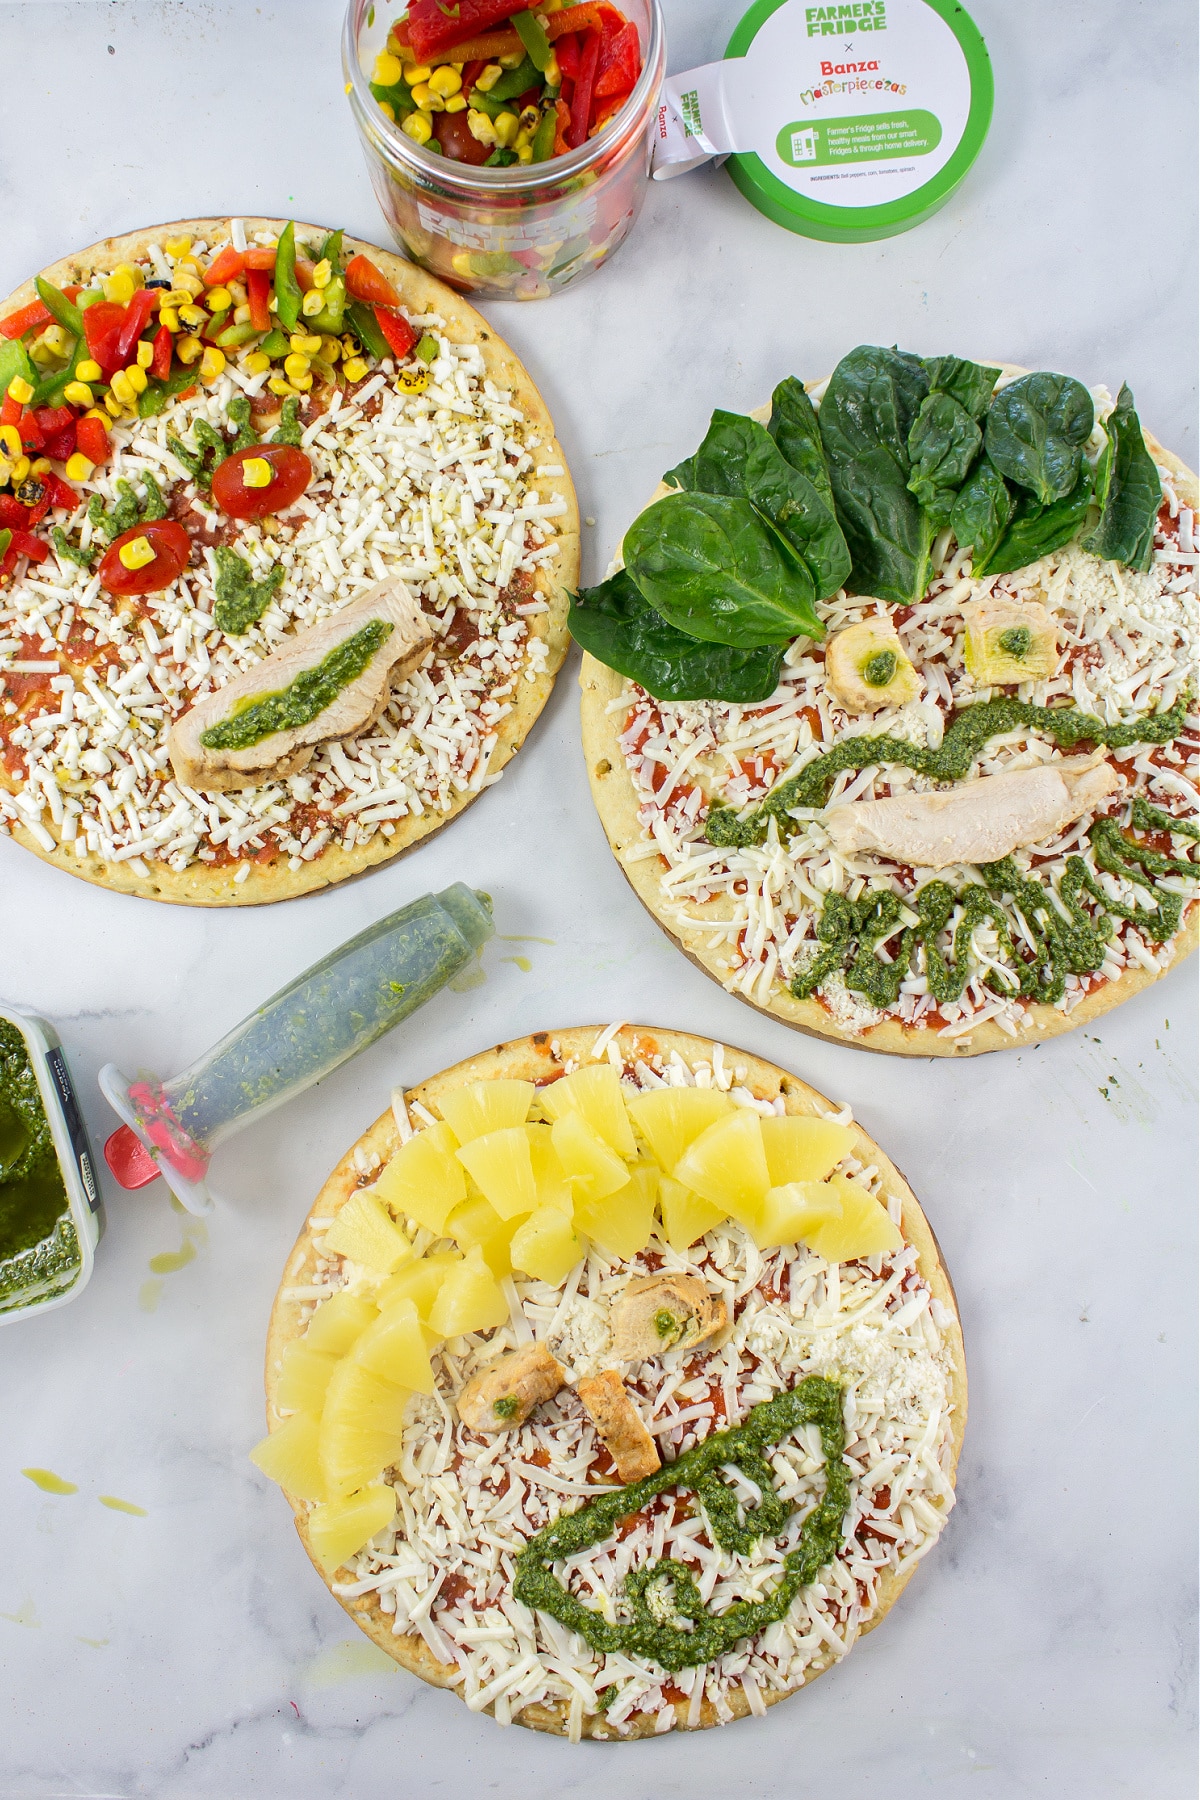 pizza decorating for a family pizza night with pizzas decorated like funny faces using vegetables and protein